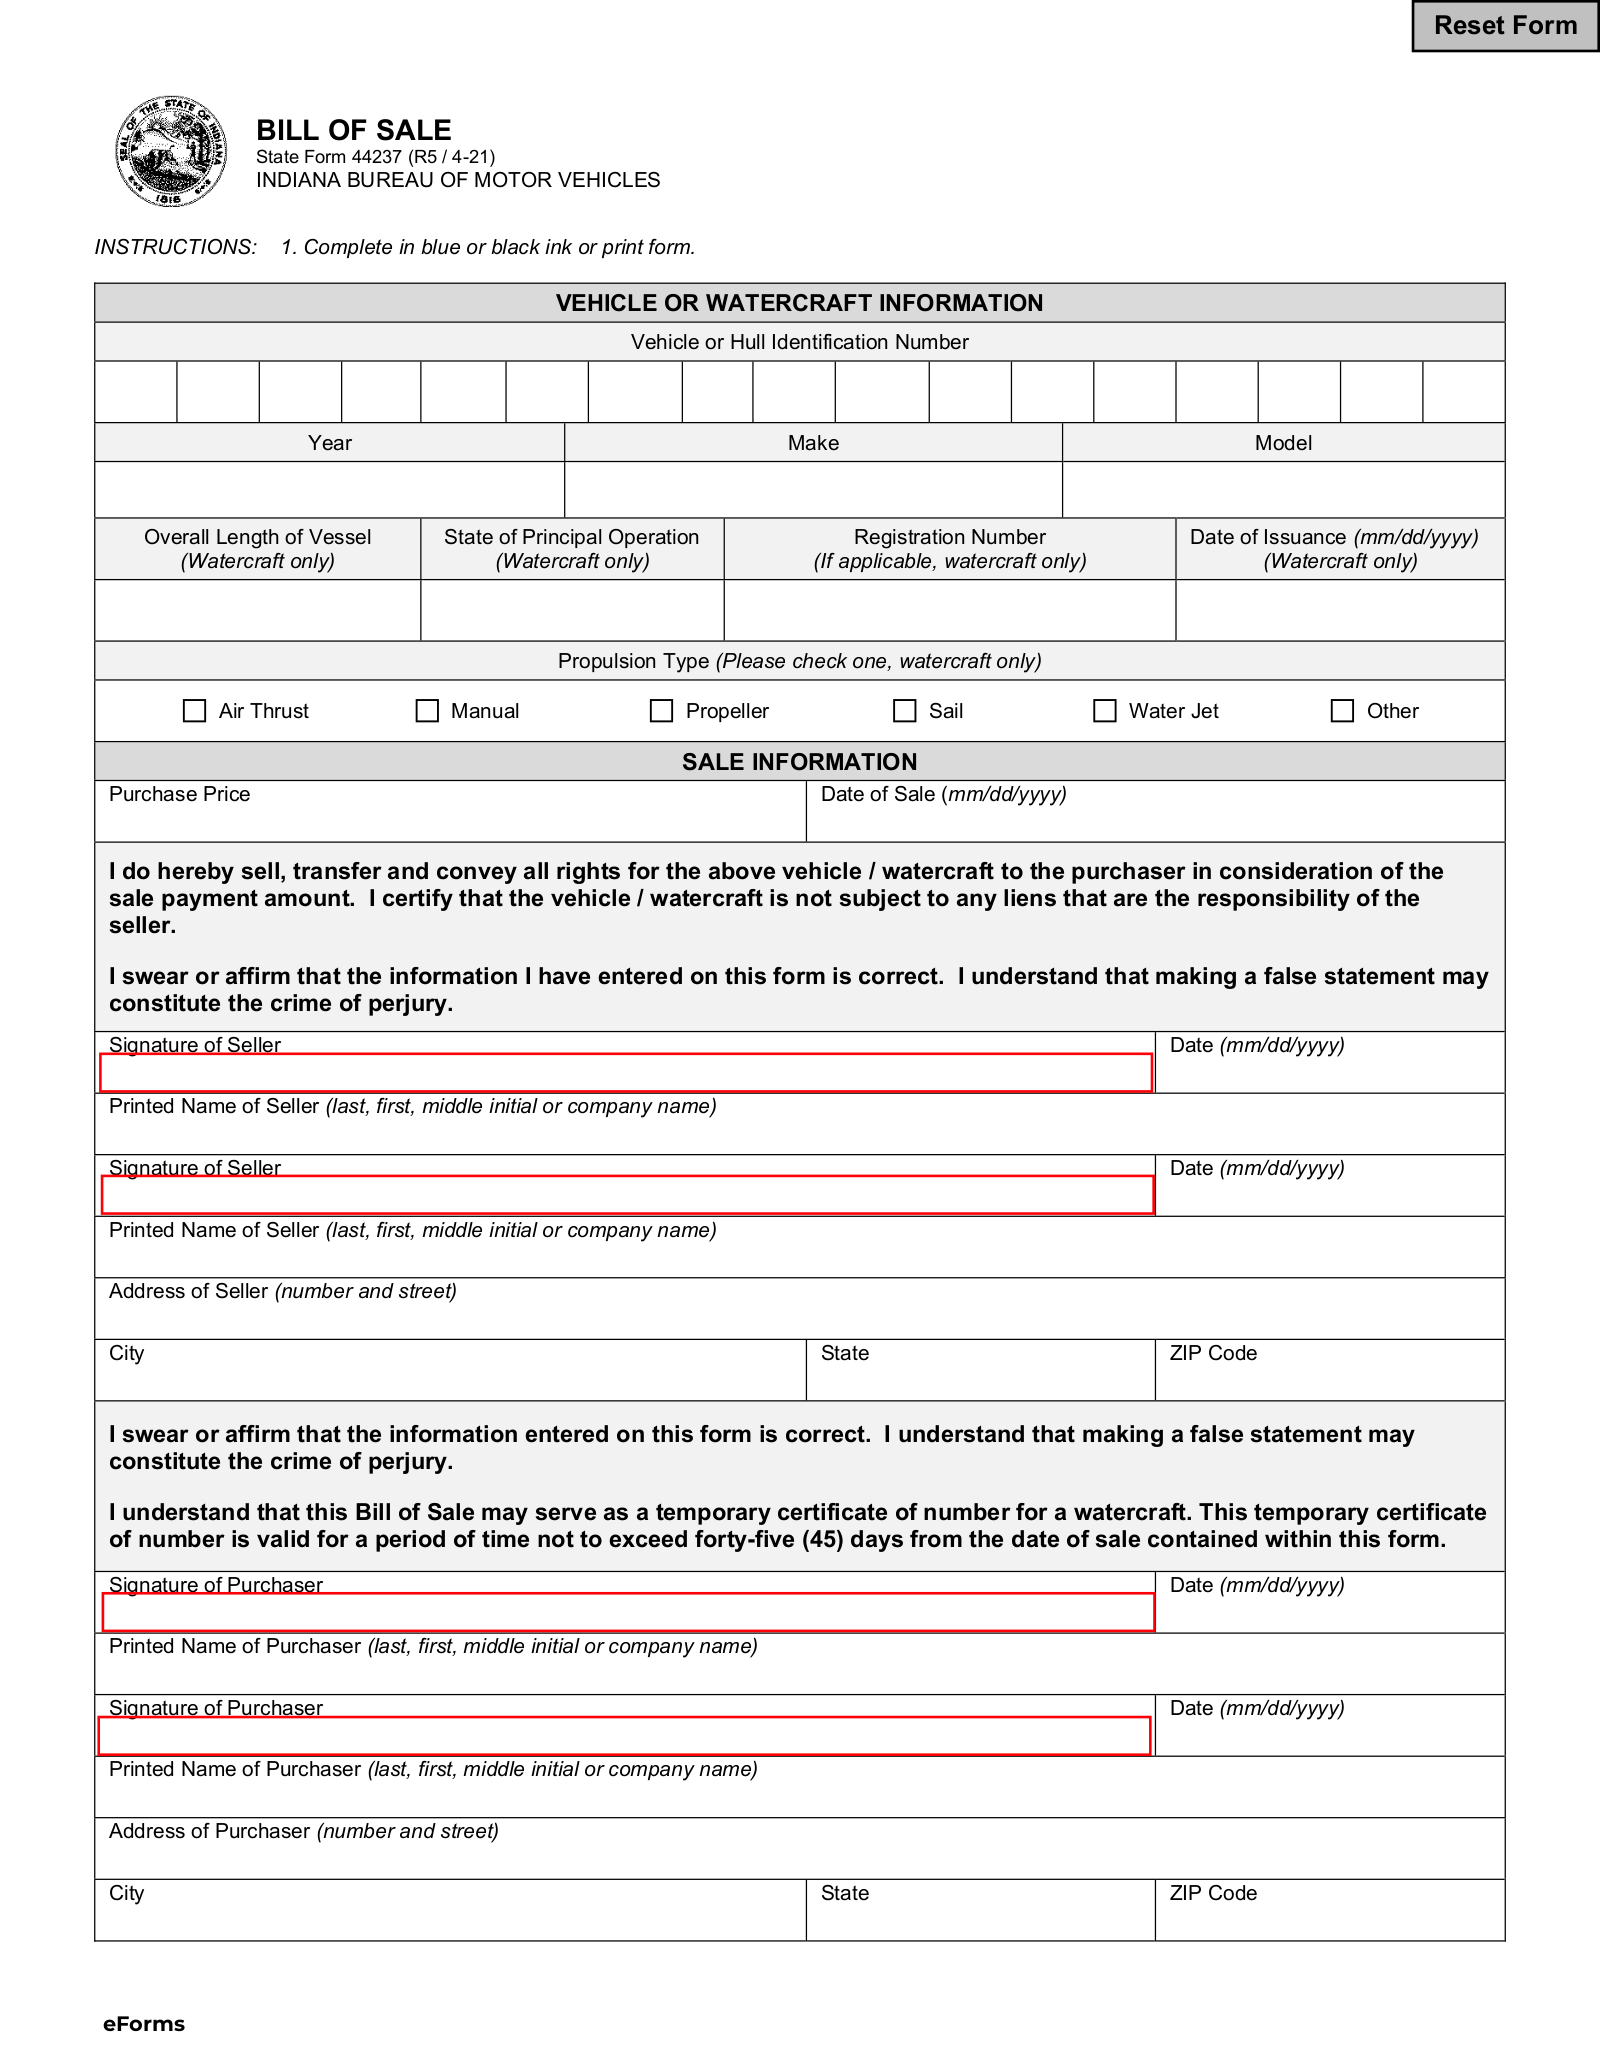 Indiana Motor Vehicle Bill of Sale | Form 44237